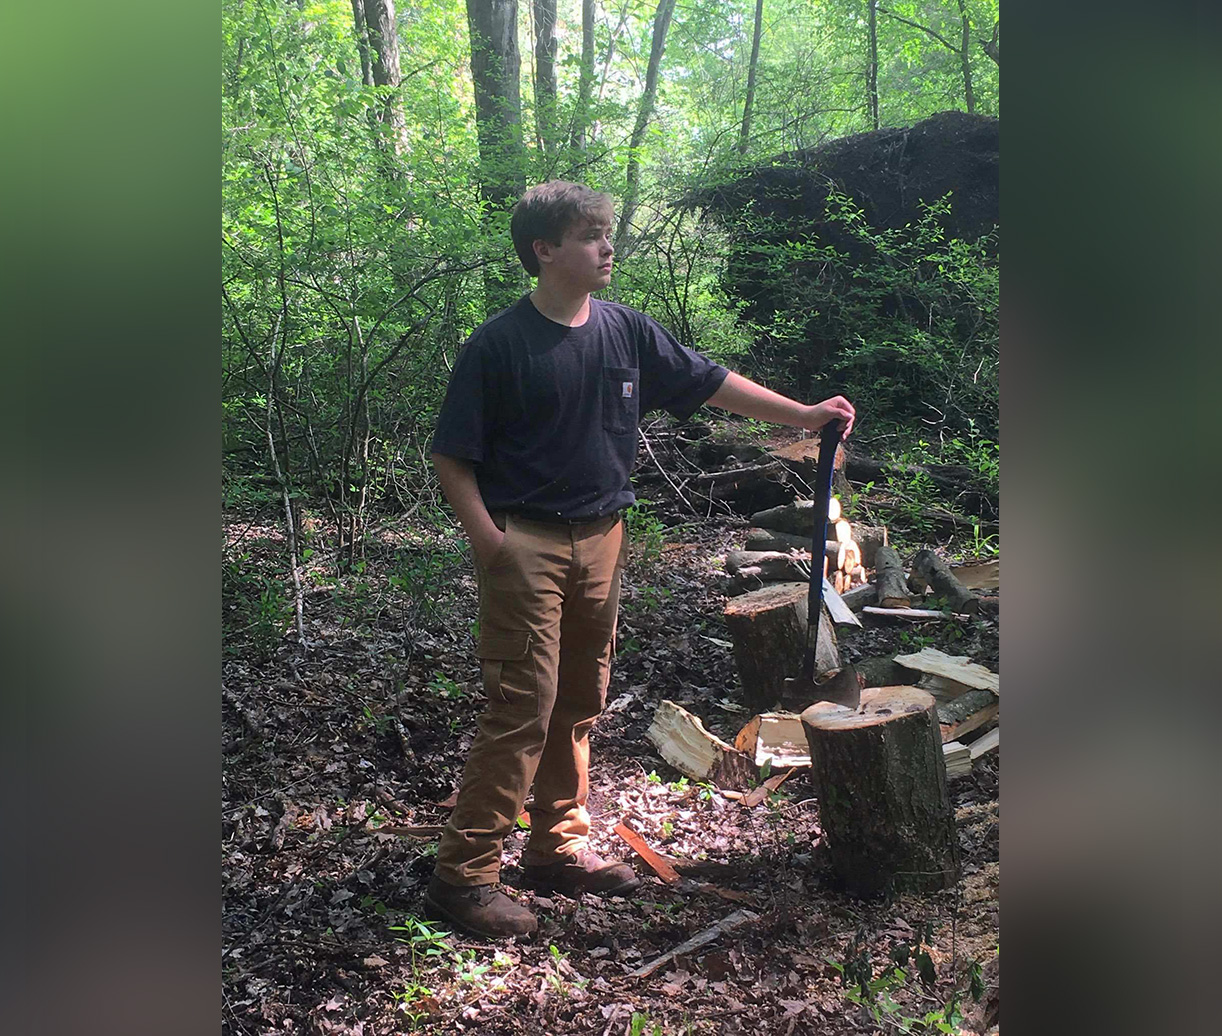 Teen Lumberjack Who S Been Chopping Wood Since Age 6 Starts Own Business Selling Firewood